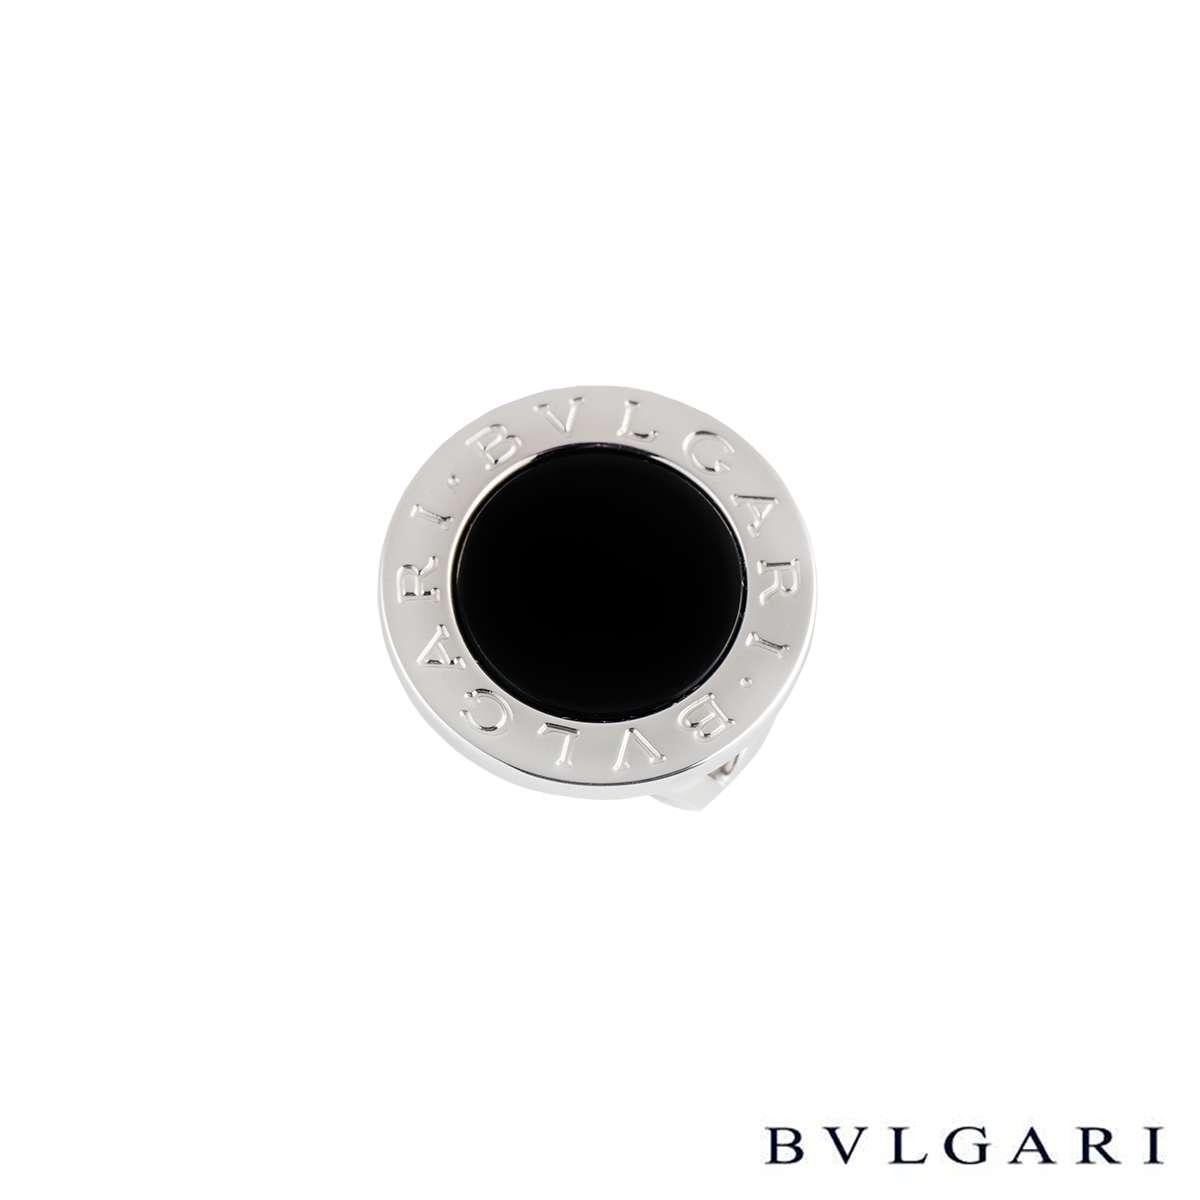 A stylish 18k white gold and onyx Bvlgari dress ring from the Bvlgari Bvlgari collection. The ring comprises of a coin style shape with the bvlgari bvlgari motif embosed on the outer edge with a onyx inlay. The ring is a size UK N / EU 53 / US 6.5